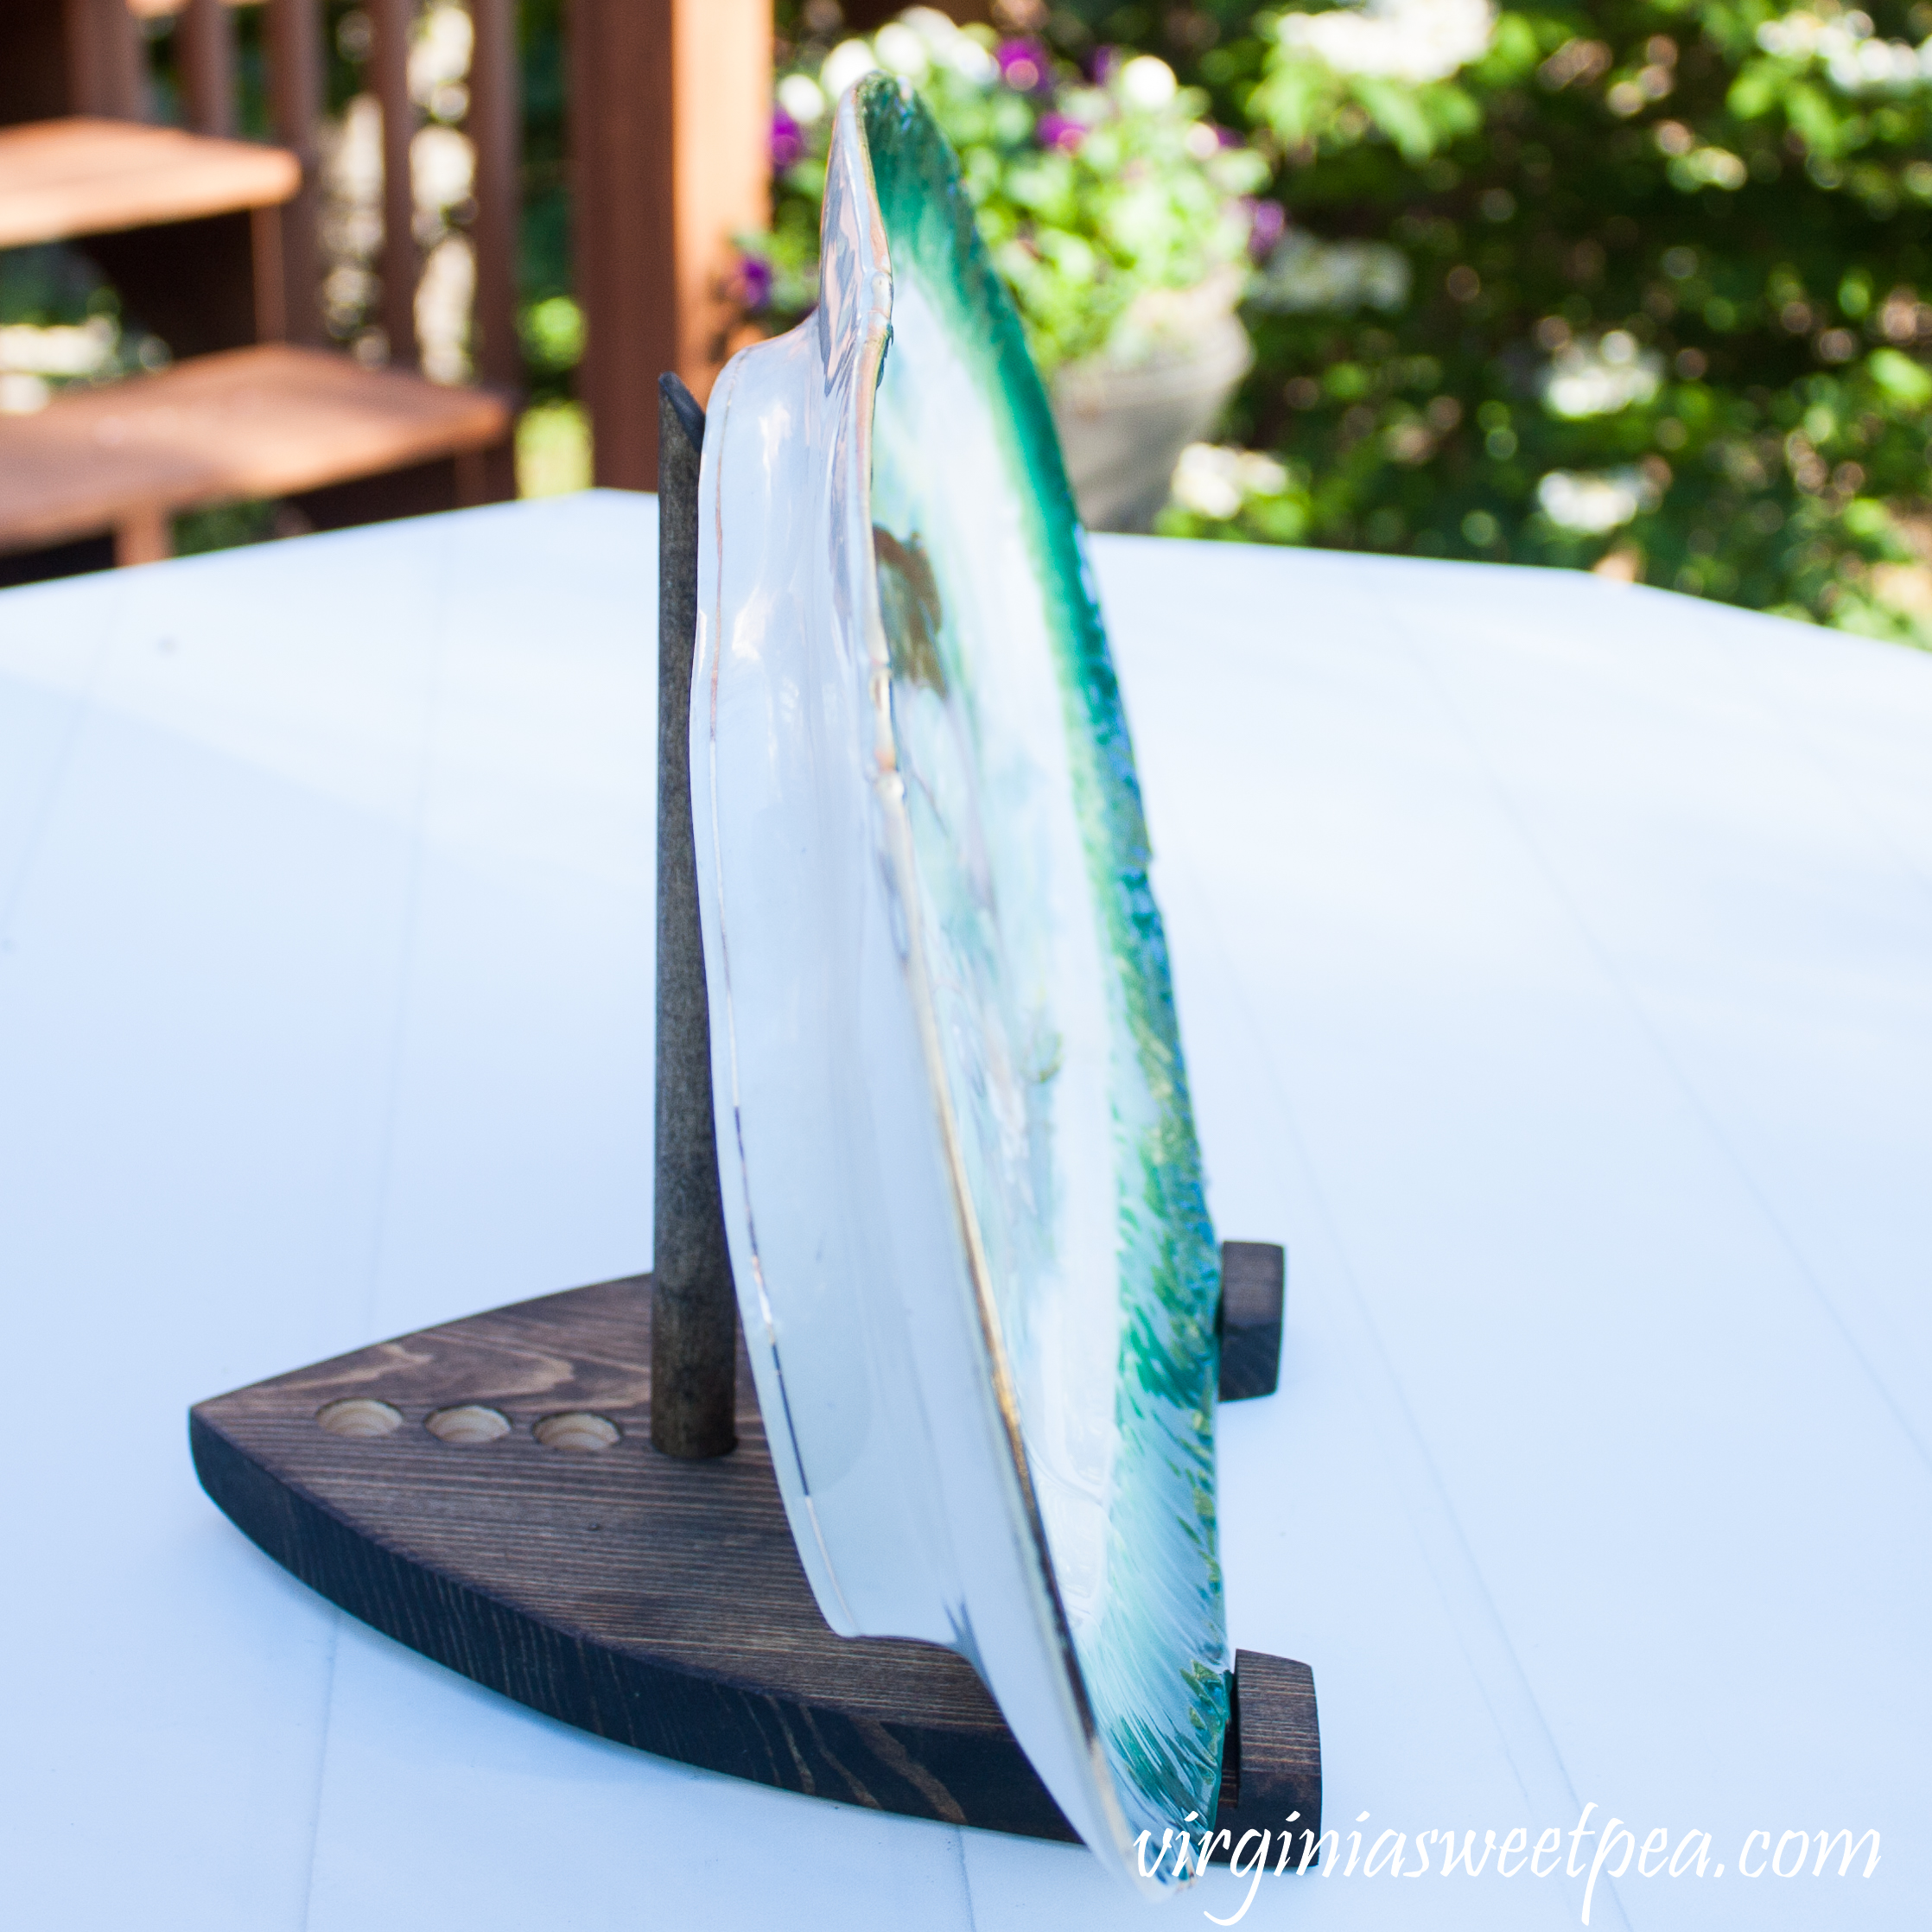 DIY Adjustable Wood Display Stand for Plates or Art - Sweet Pea